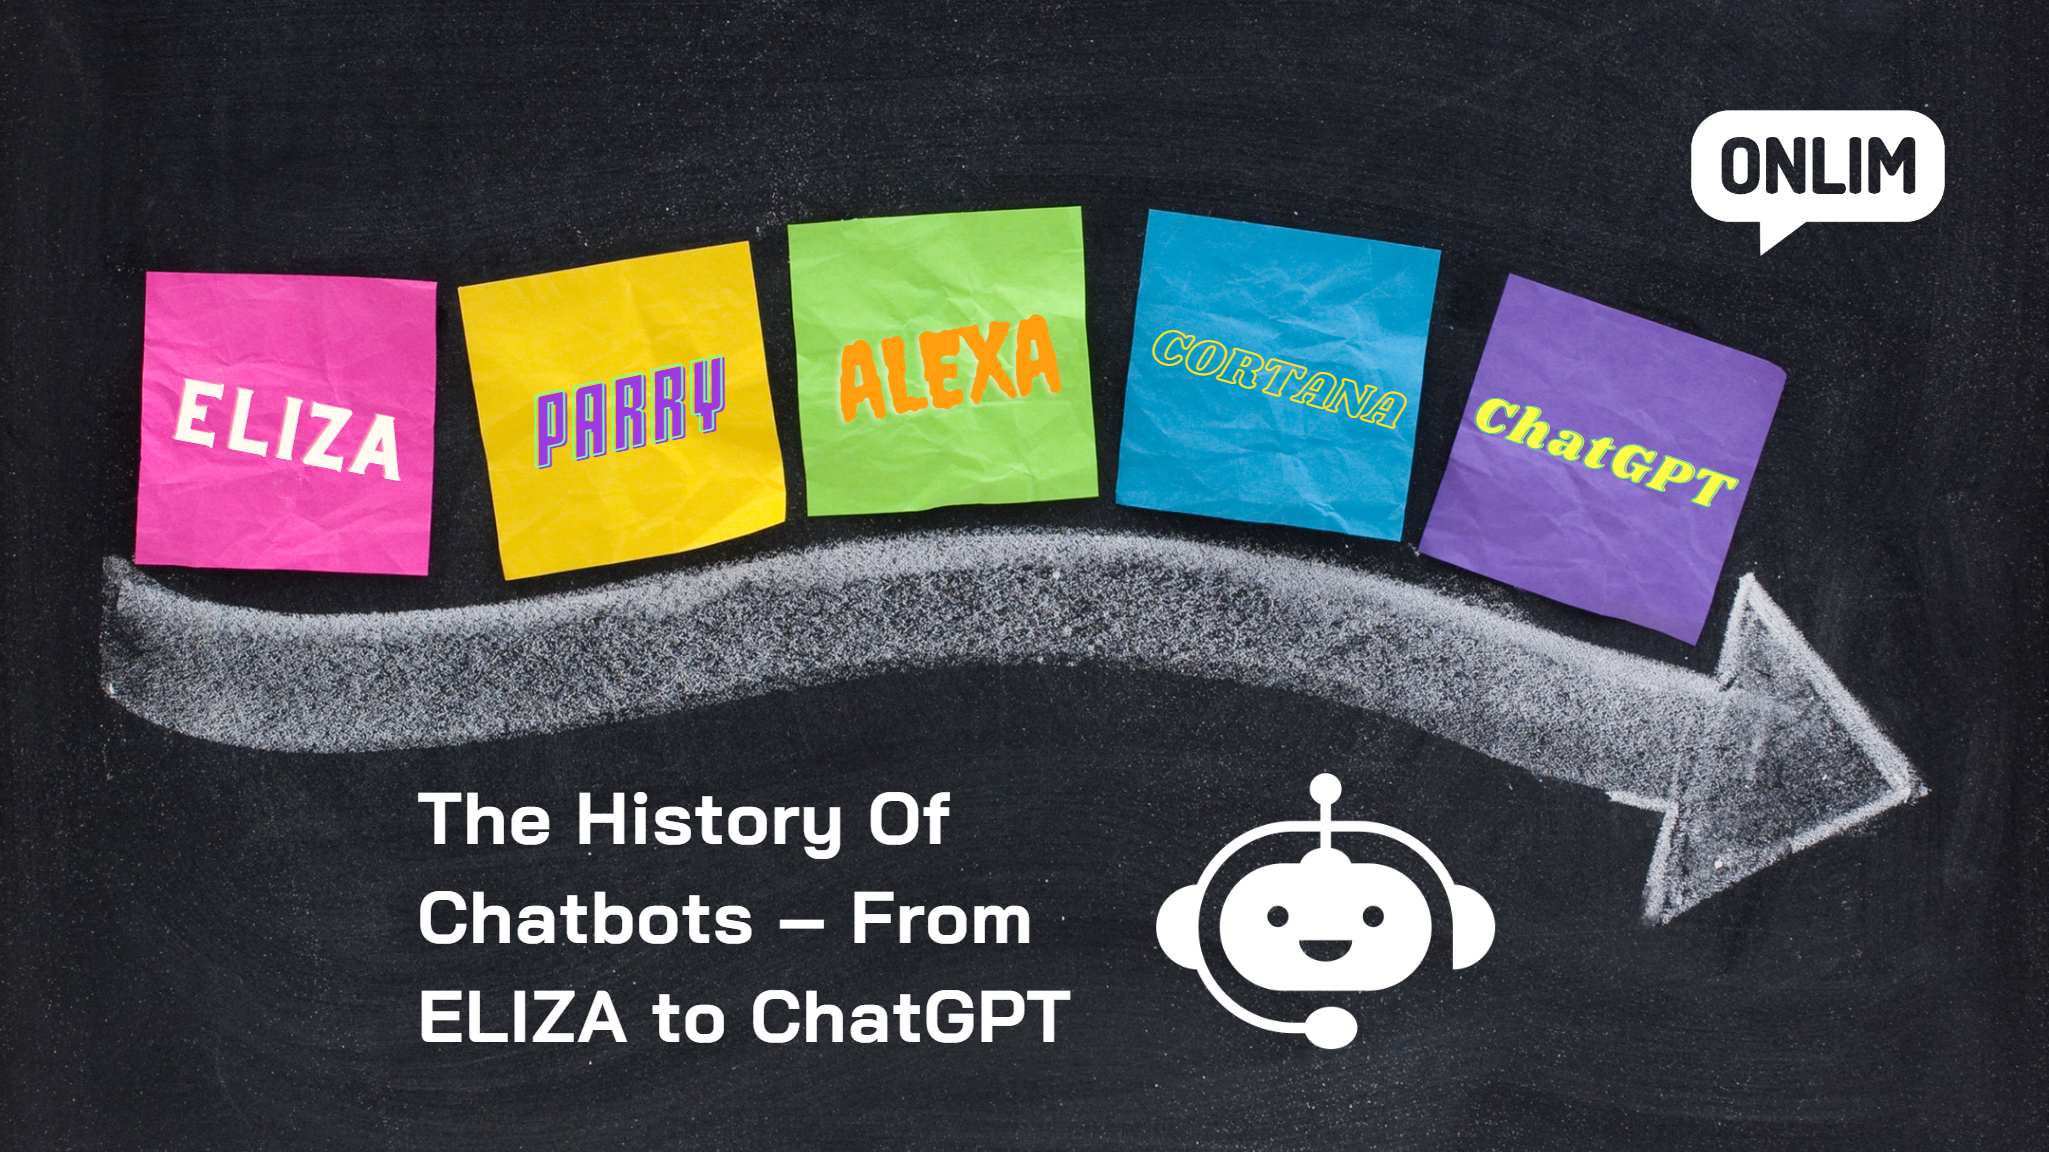 Chatbots - From ELIZA to ChatGPT